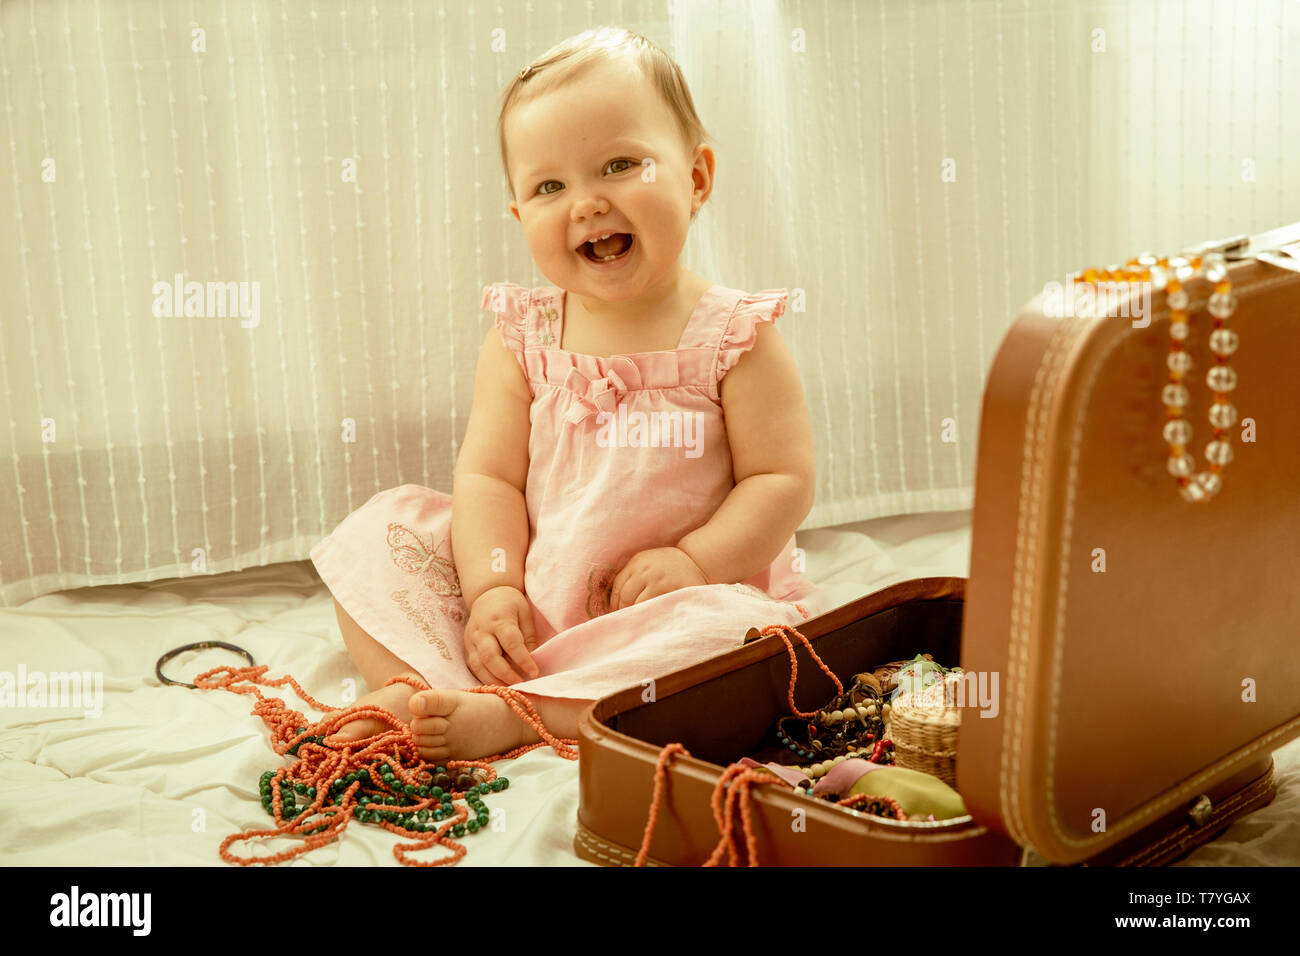 Cute baby smiling Stock Photo